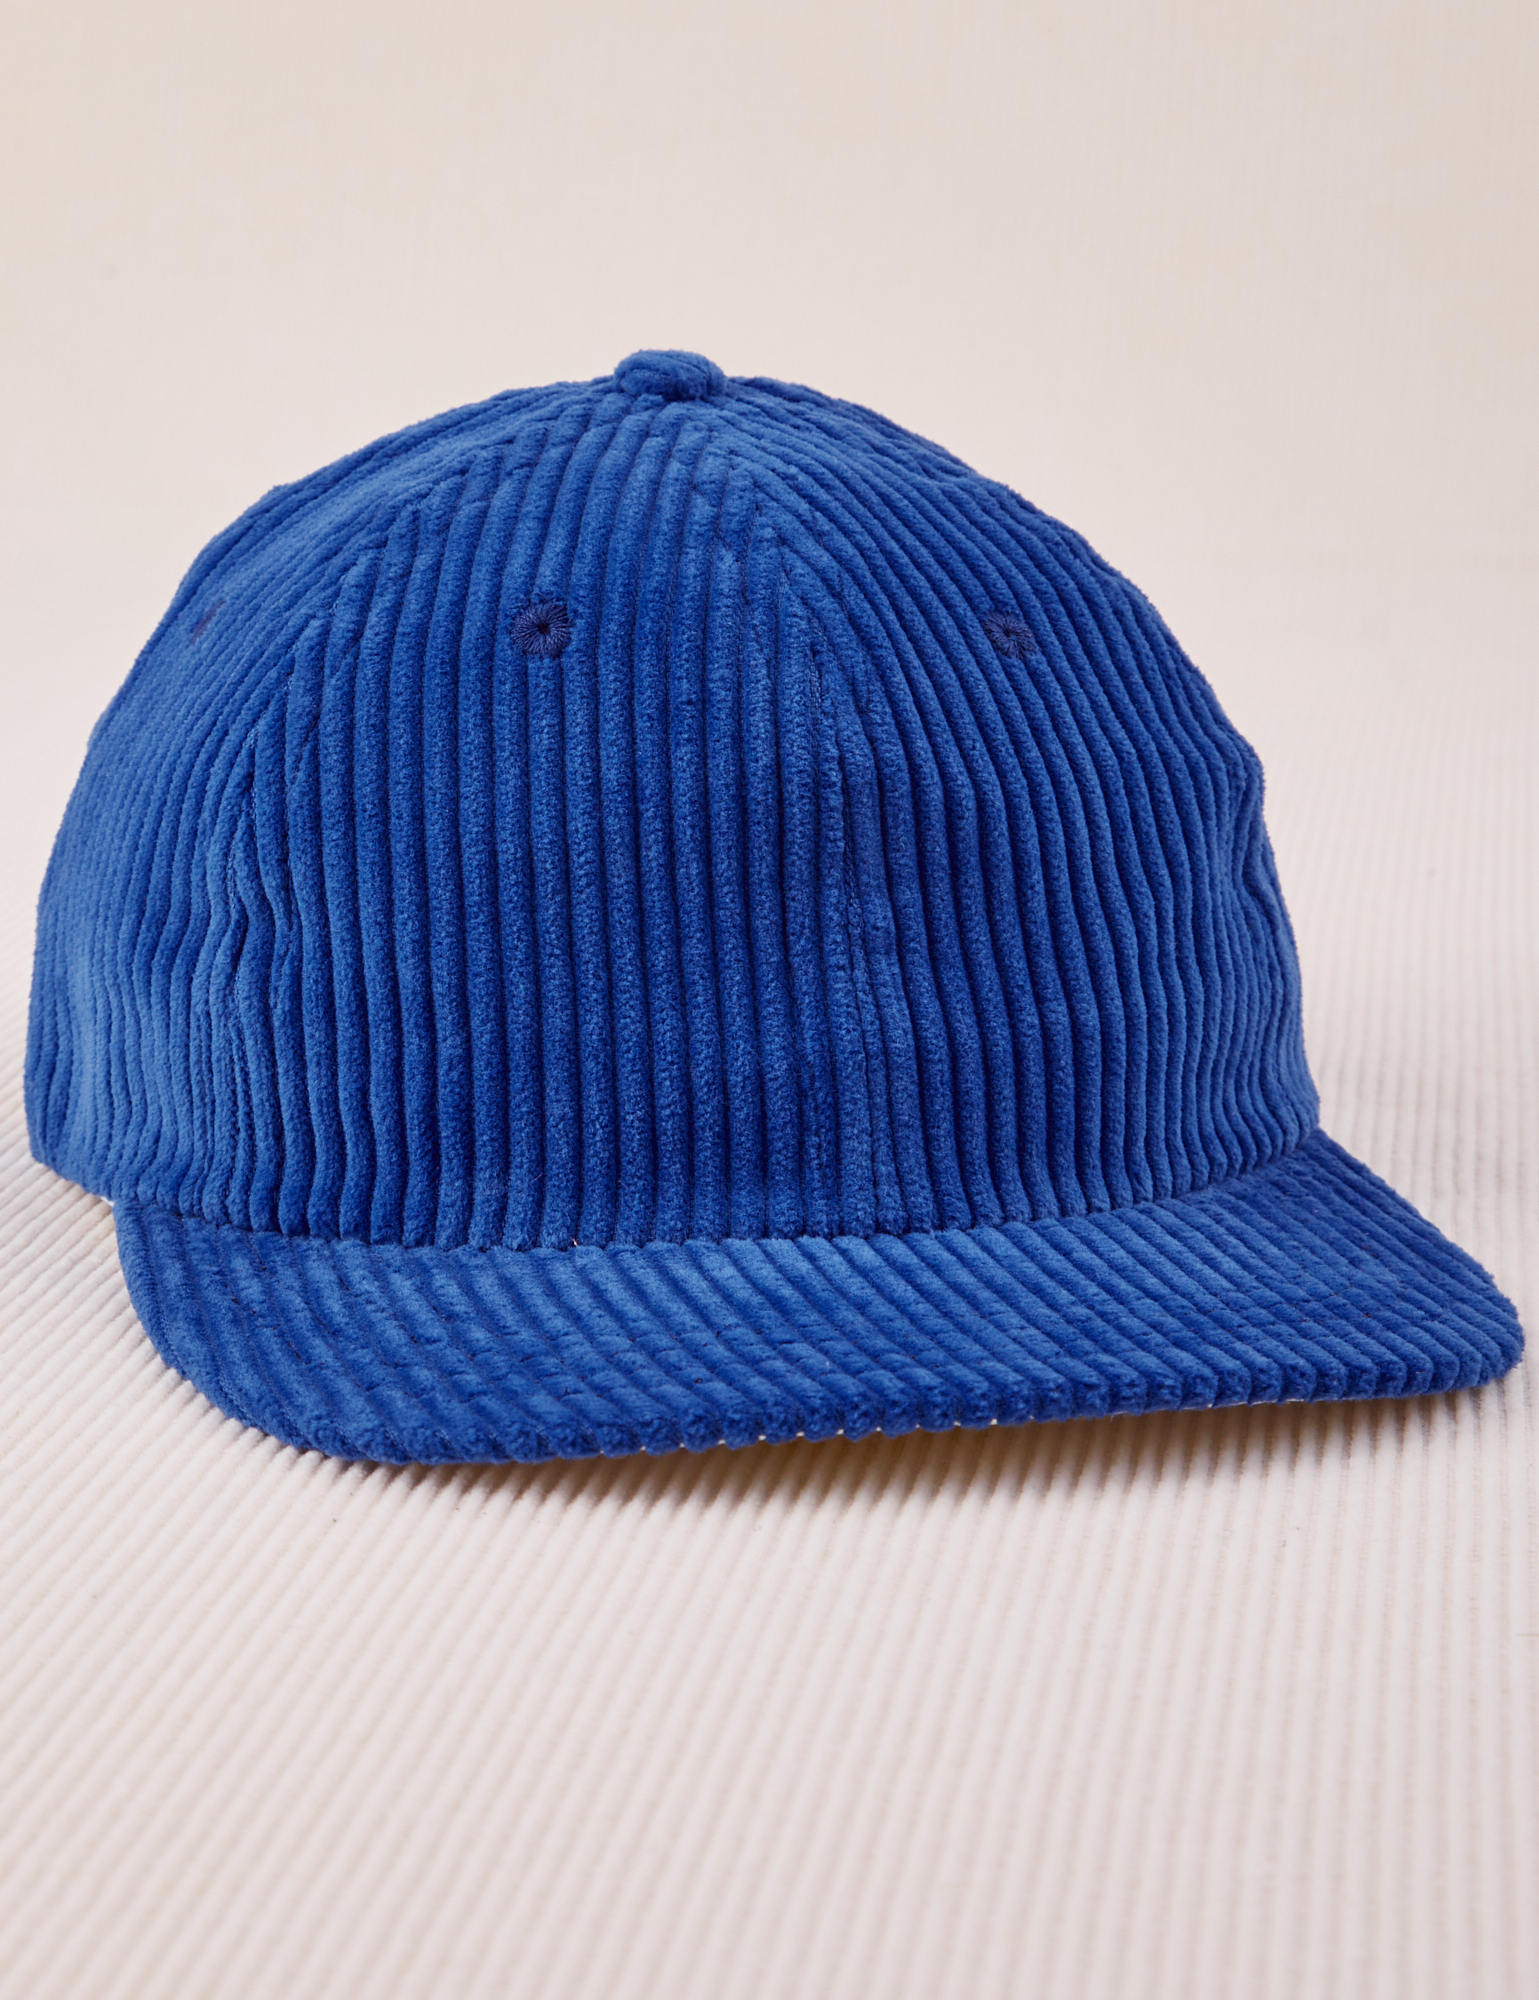 Dugout Corduroy Hat in Royal Blue